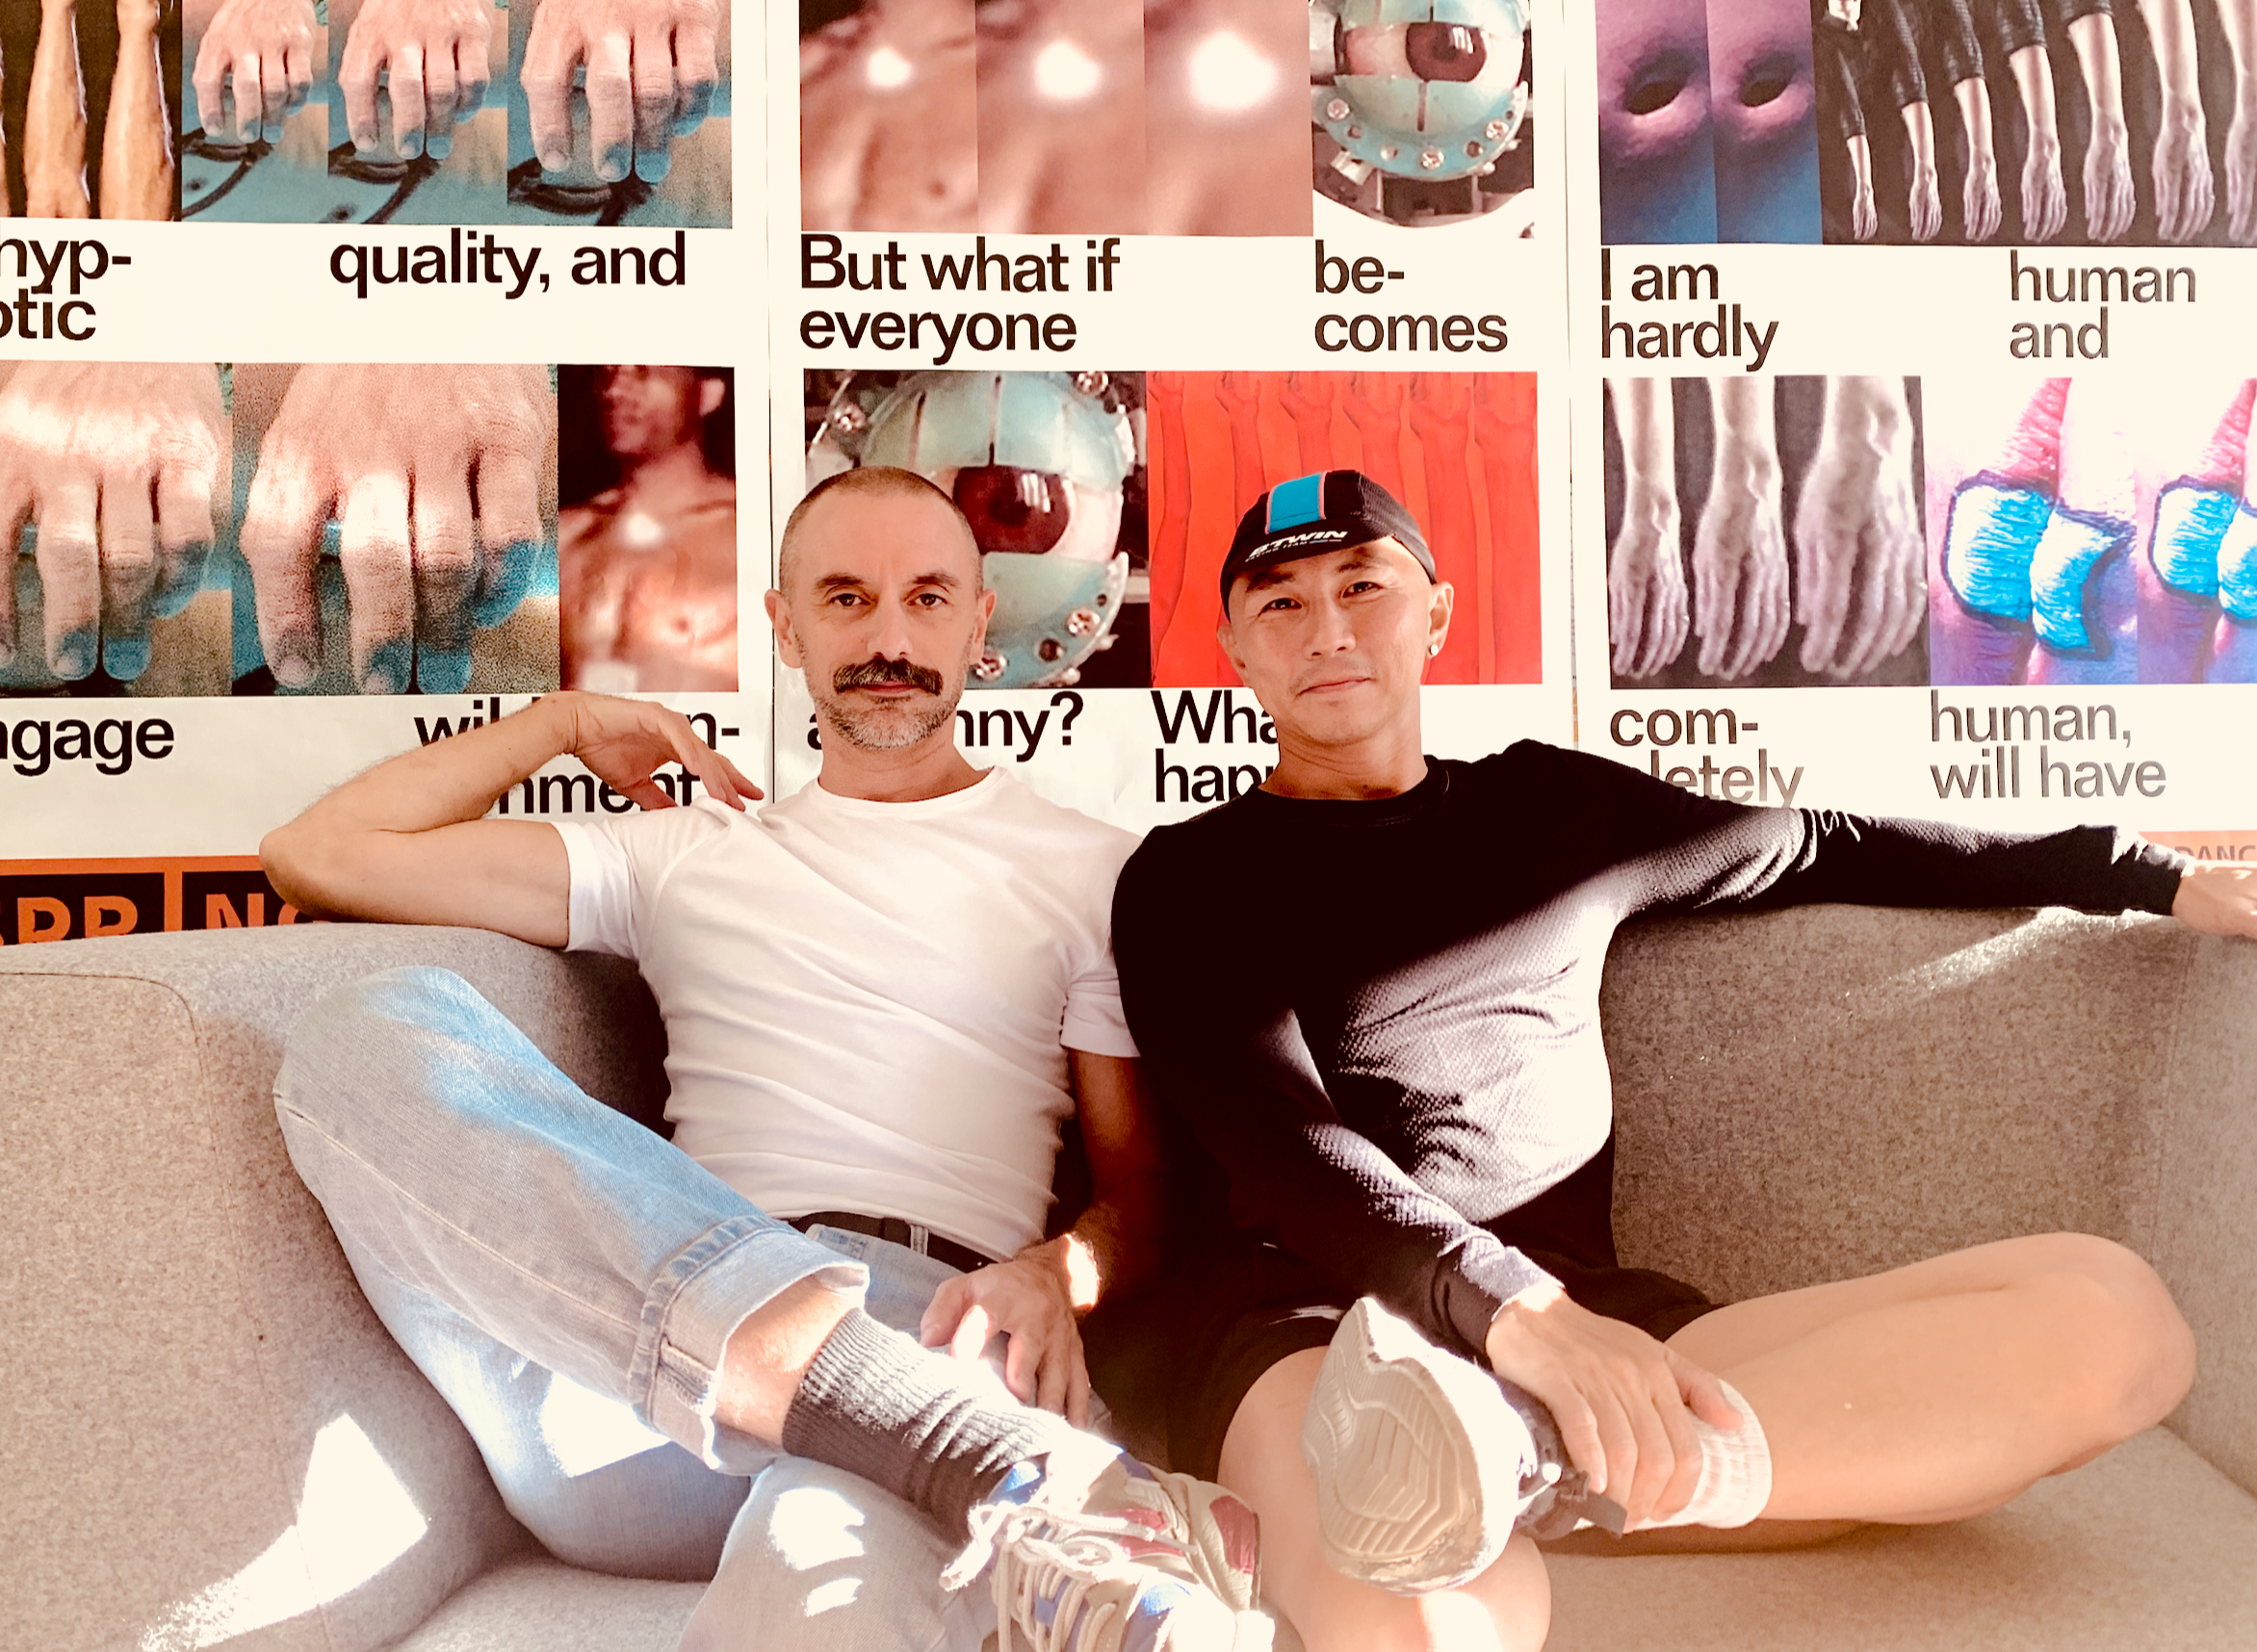 Two men sit on a couch together. The man on the left wears a white shirt and blue jeans and the other wears a cap and black shirt and shorts.